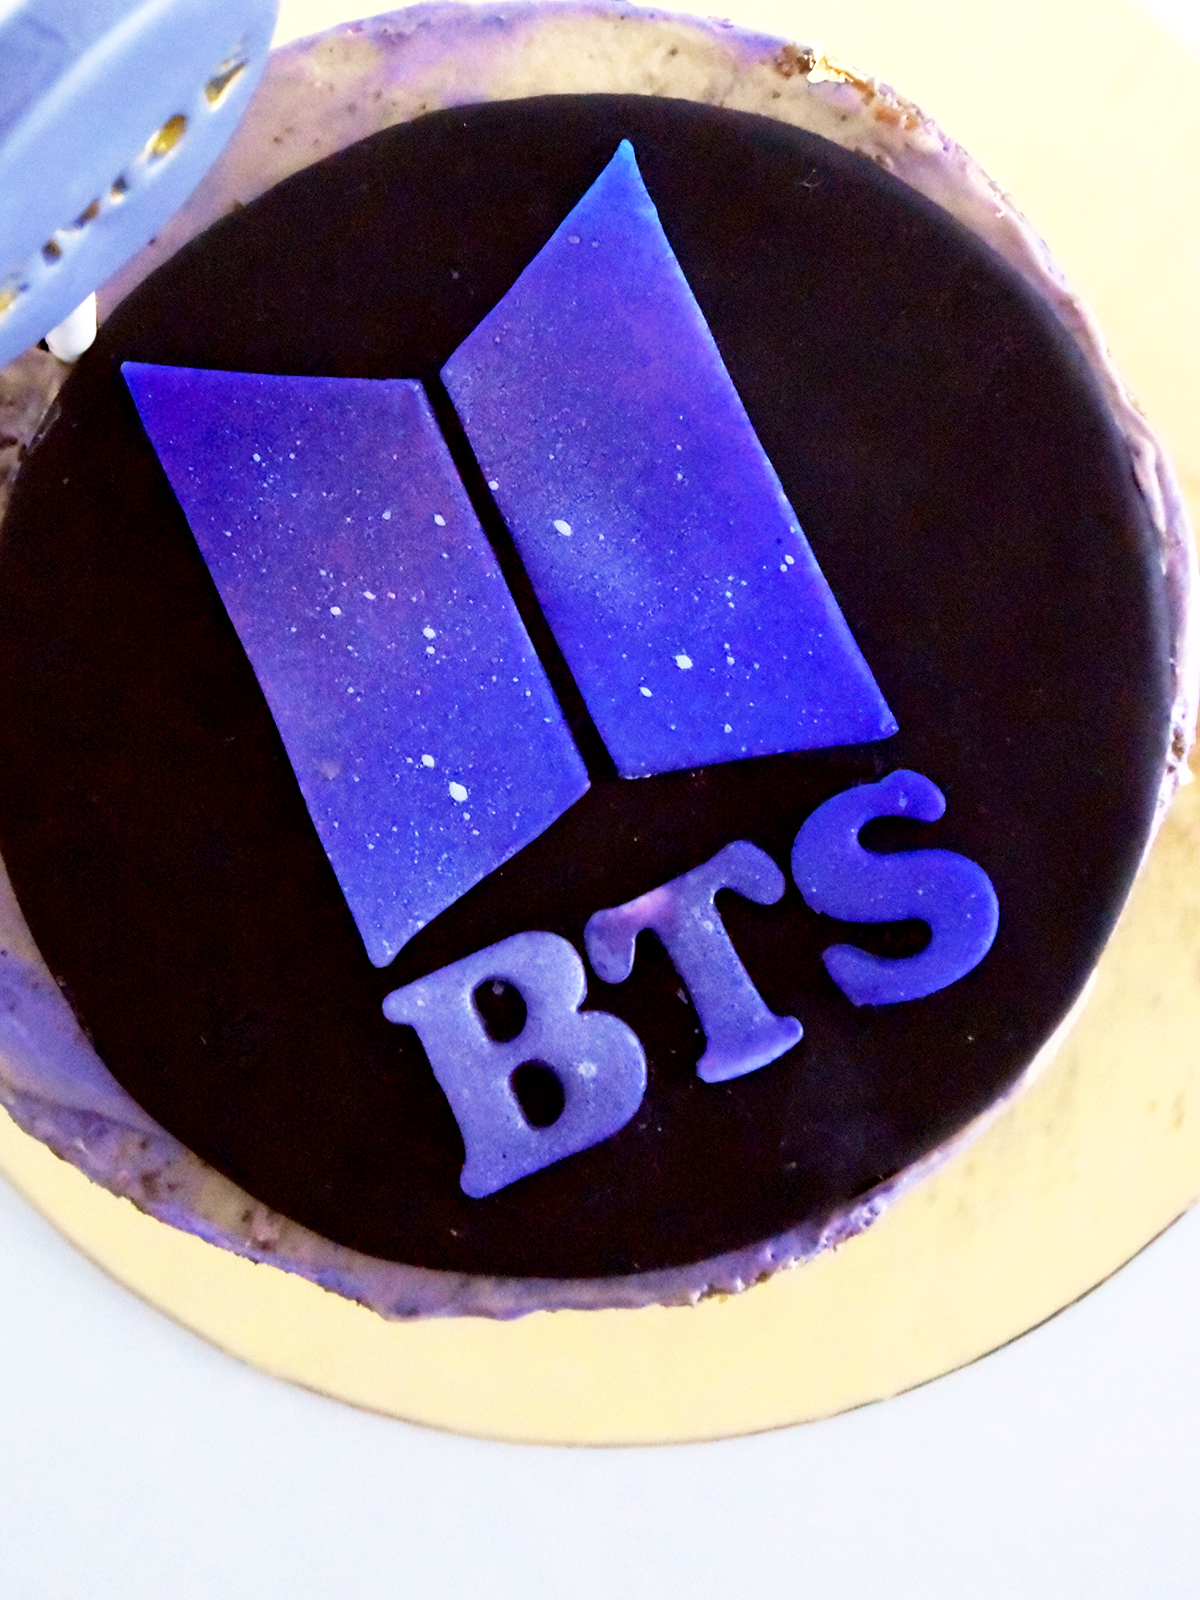 Gift N Gifts BTS Laser Cut Cake Topper with Carved Logo with Bangtan Boys  Cut Out -BTS Birthday Memories/Bday Cakes Decorations/ – DukanIndia